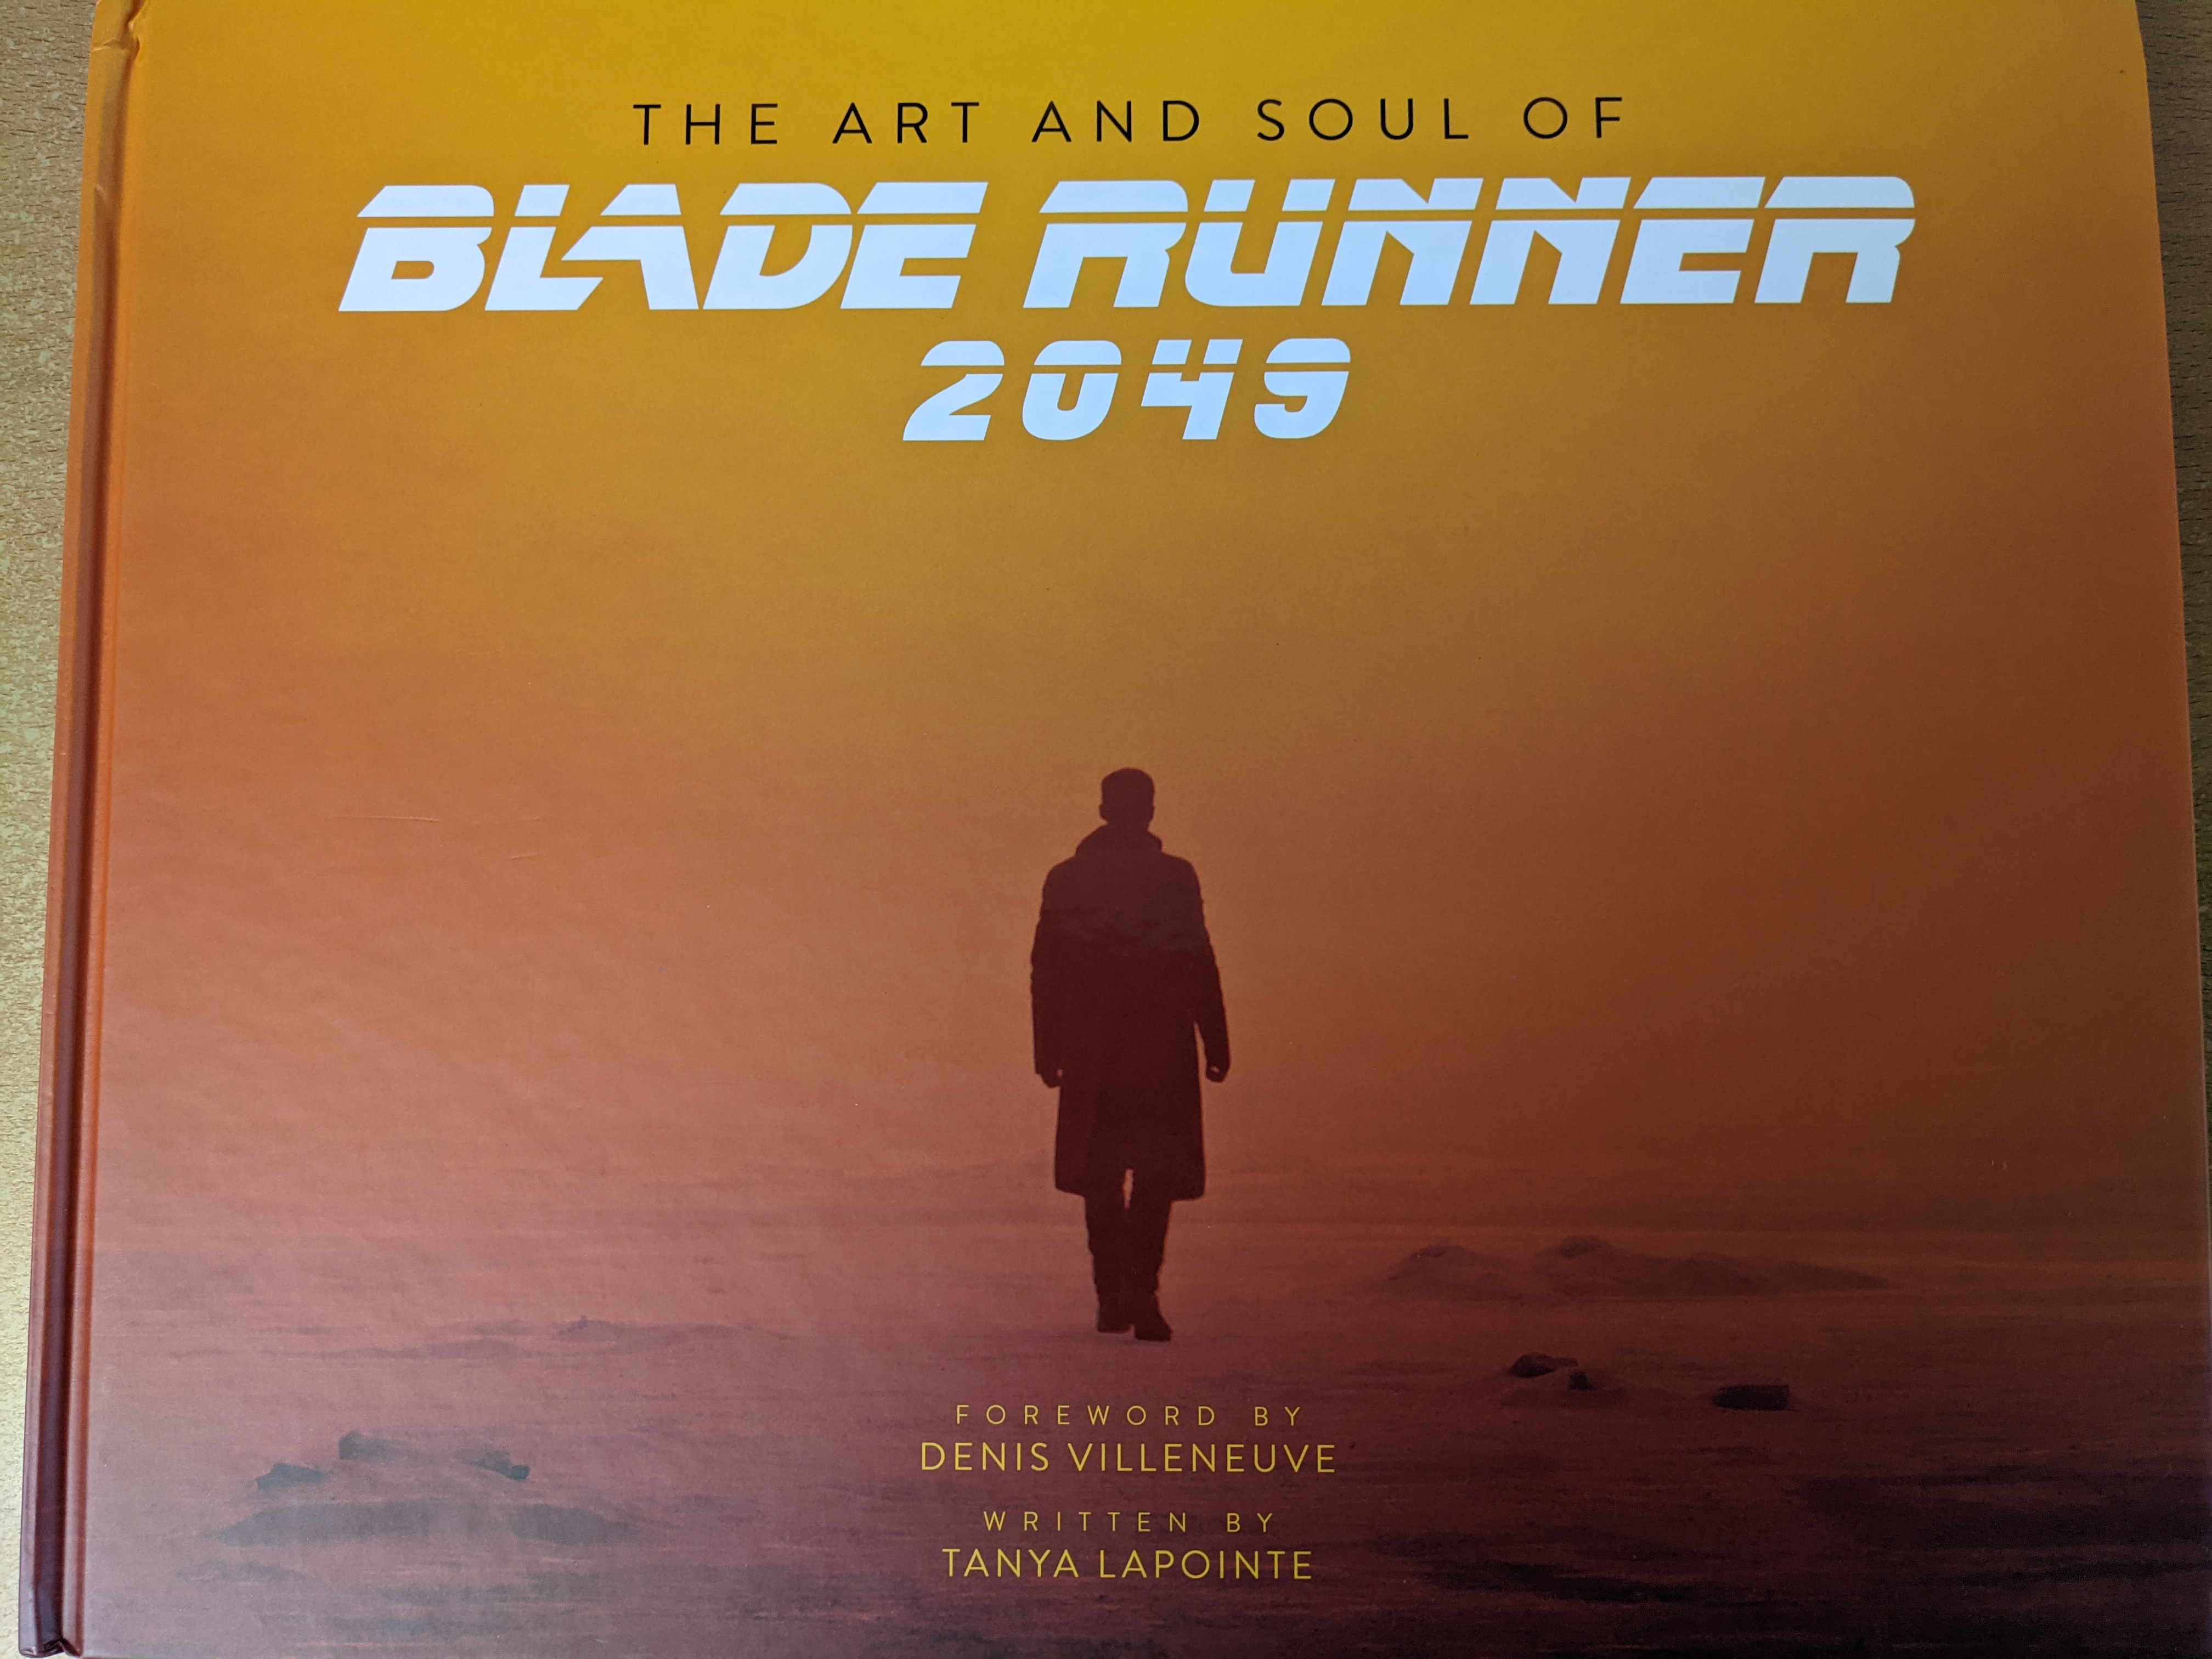 The-Art-and-Soul-of-Blade-Runner-2049-cover